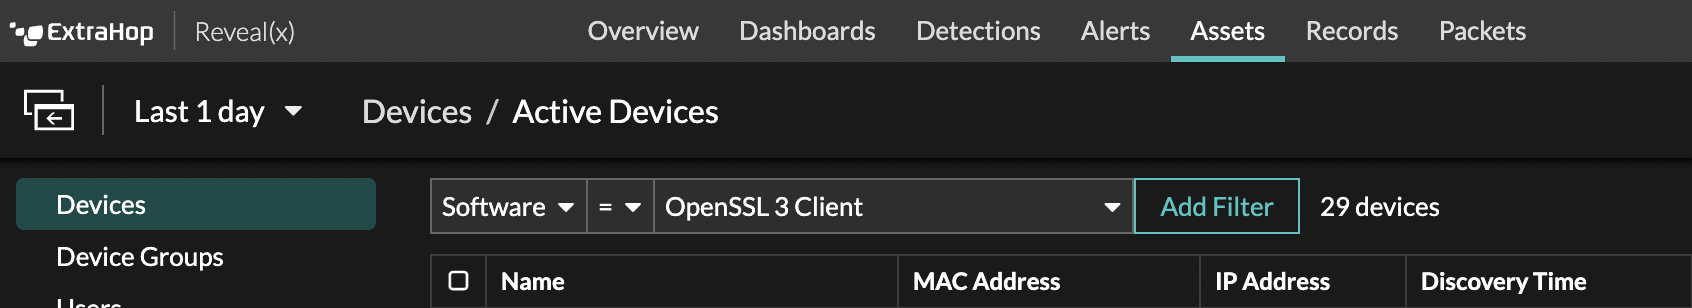 Active devices search pane showing search for OpenSSL 3 clients in Reveal(x) UI